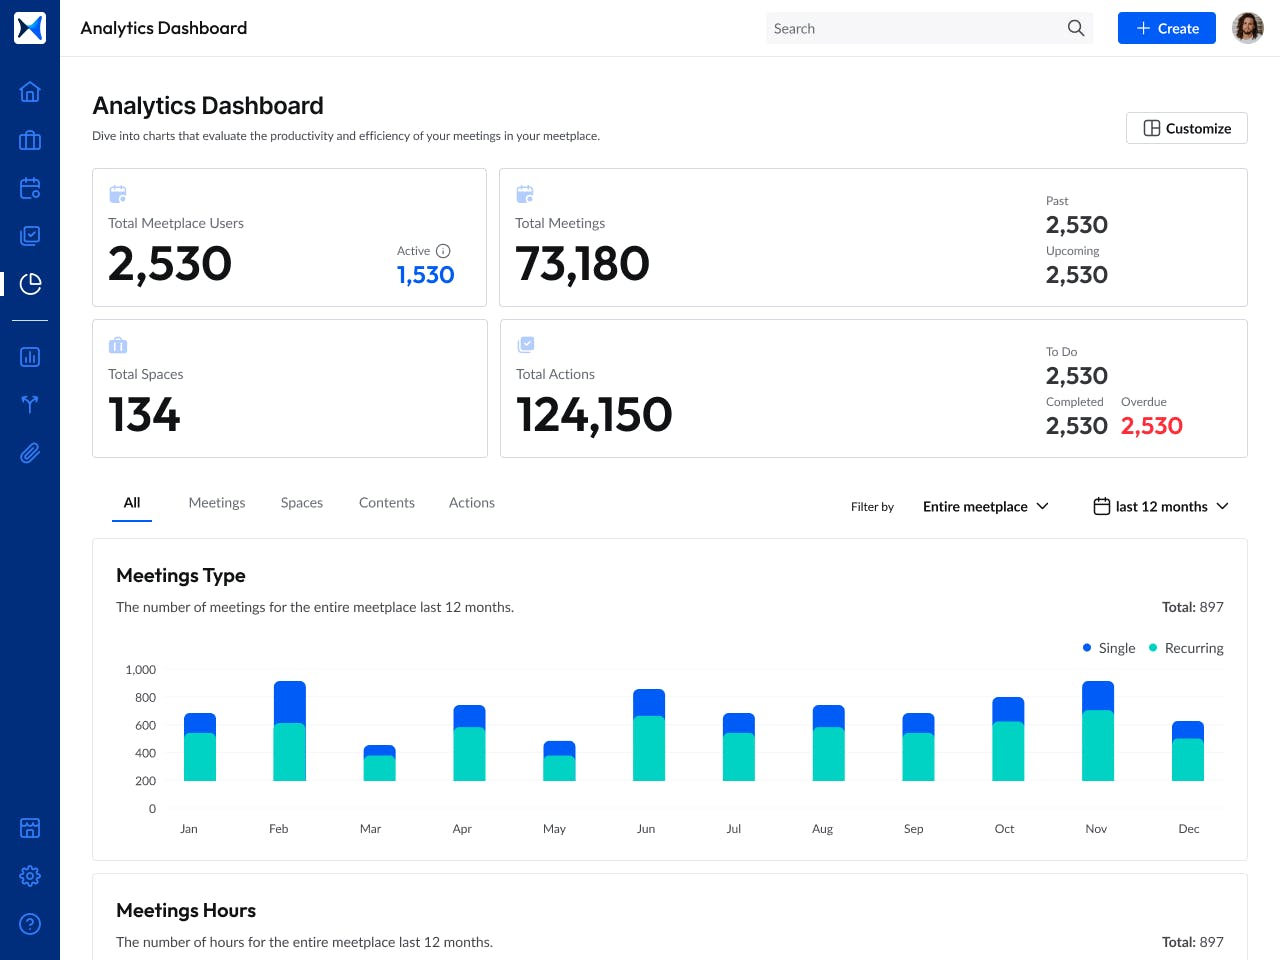 View analytics dashboard for insights